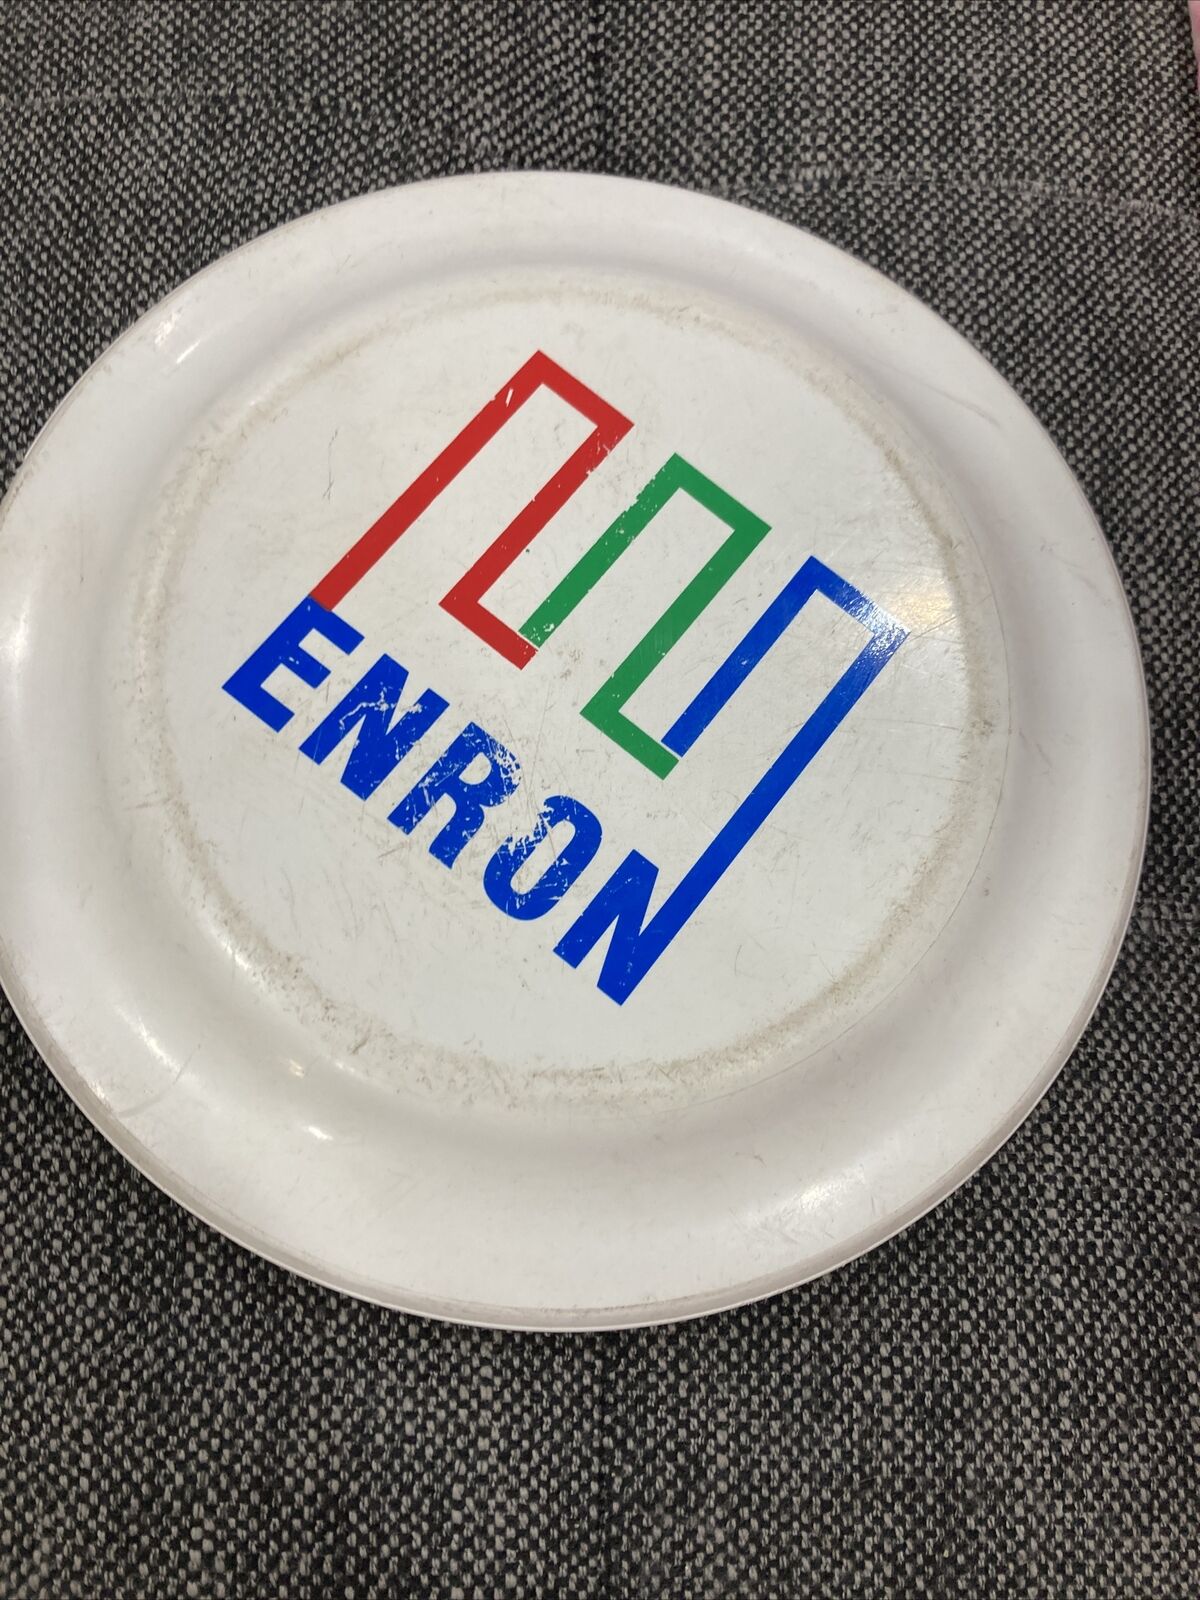 Rare Vintage Promotional Enron Corp Corporation Flying Disc Advertisement Toy